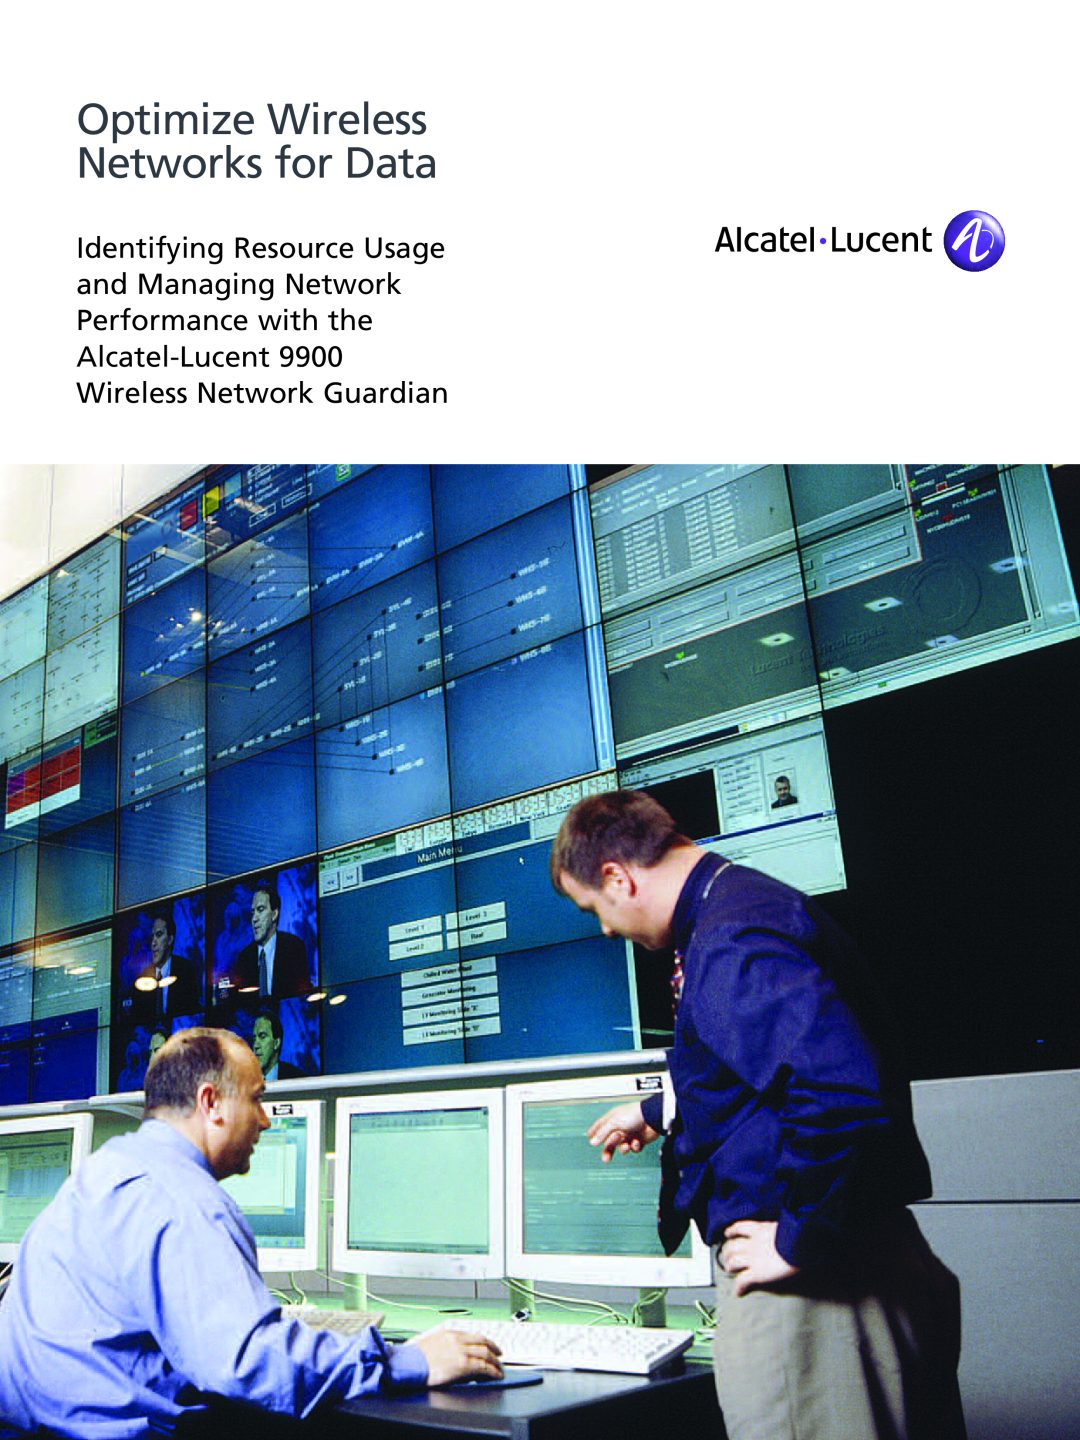 Alcatel-Lucent 9900 manual Optimize Wireless Networks for Data 